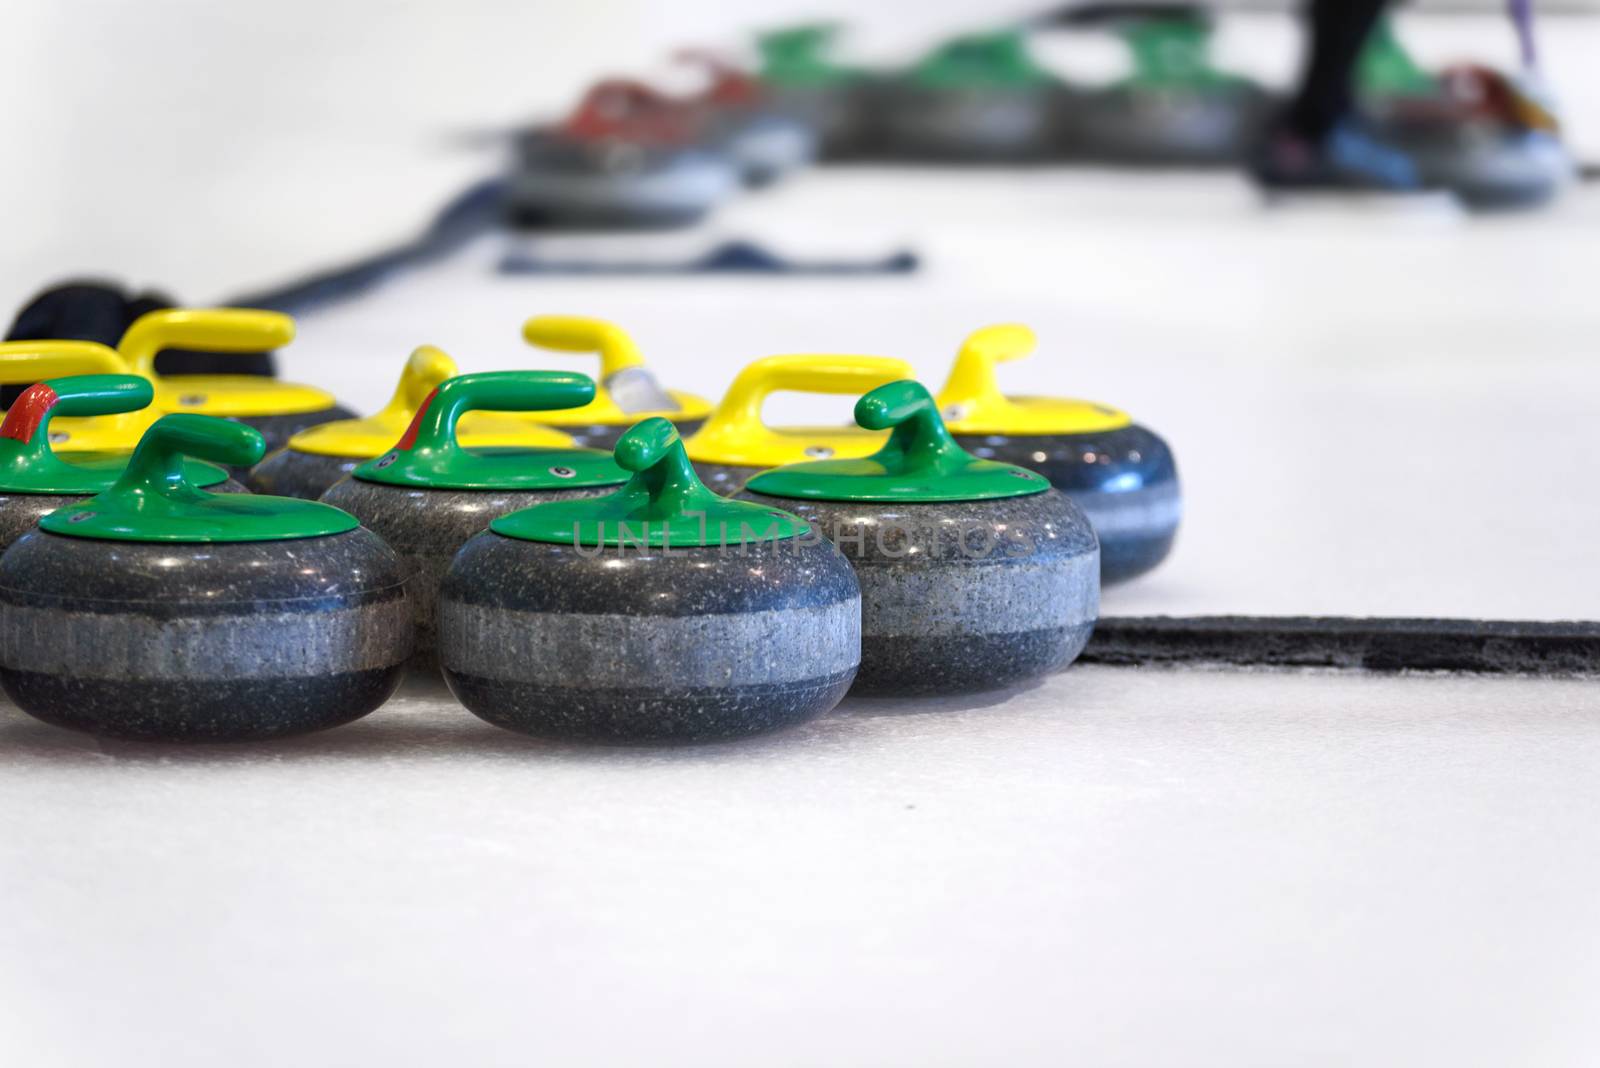 Curling stones equipment on the ice in close-up.